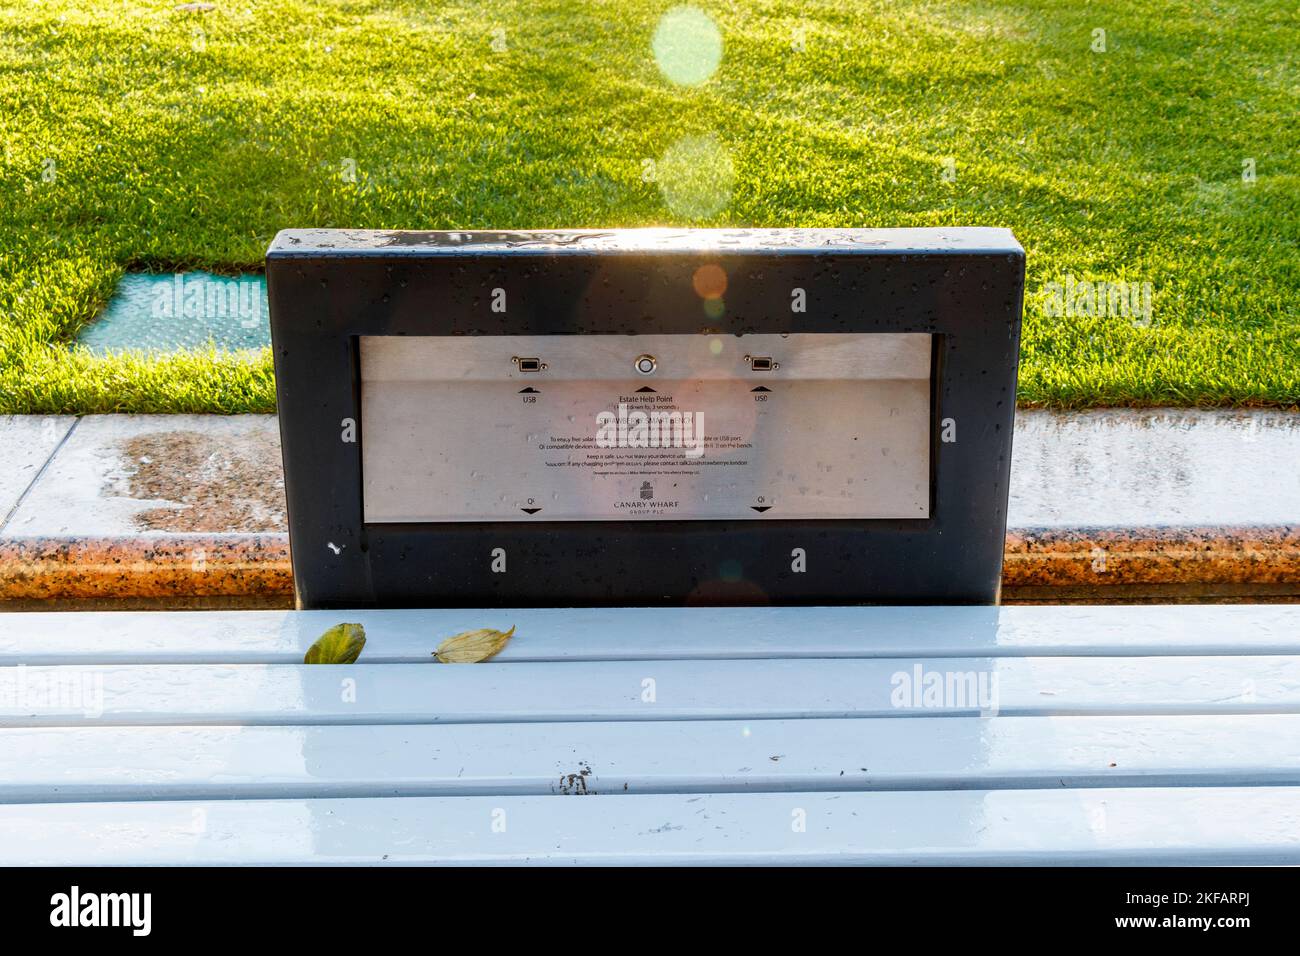 A Strawberry Smart Bench, a public solar charger for mobile devices, in Westherry Circus, Tower Hamlets, London, UK Stock Photo